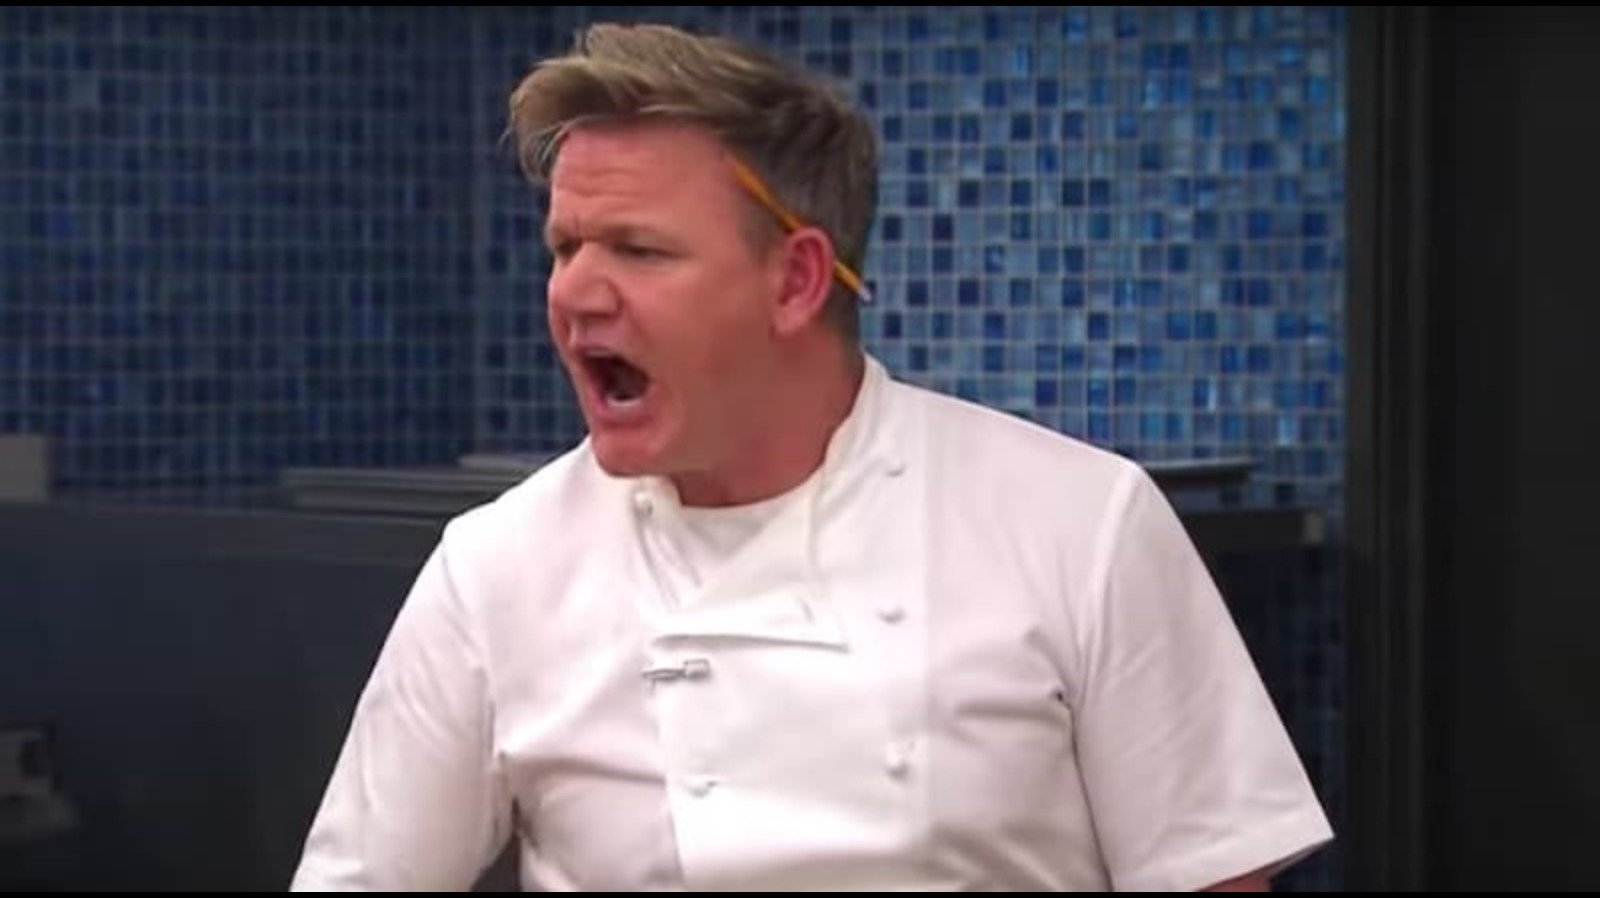 Gordon Ramsay's Angriest Moment On The Set Of Hell's Kitchen - Exclusive